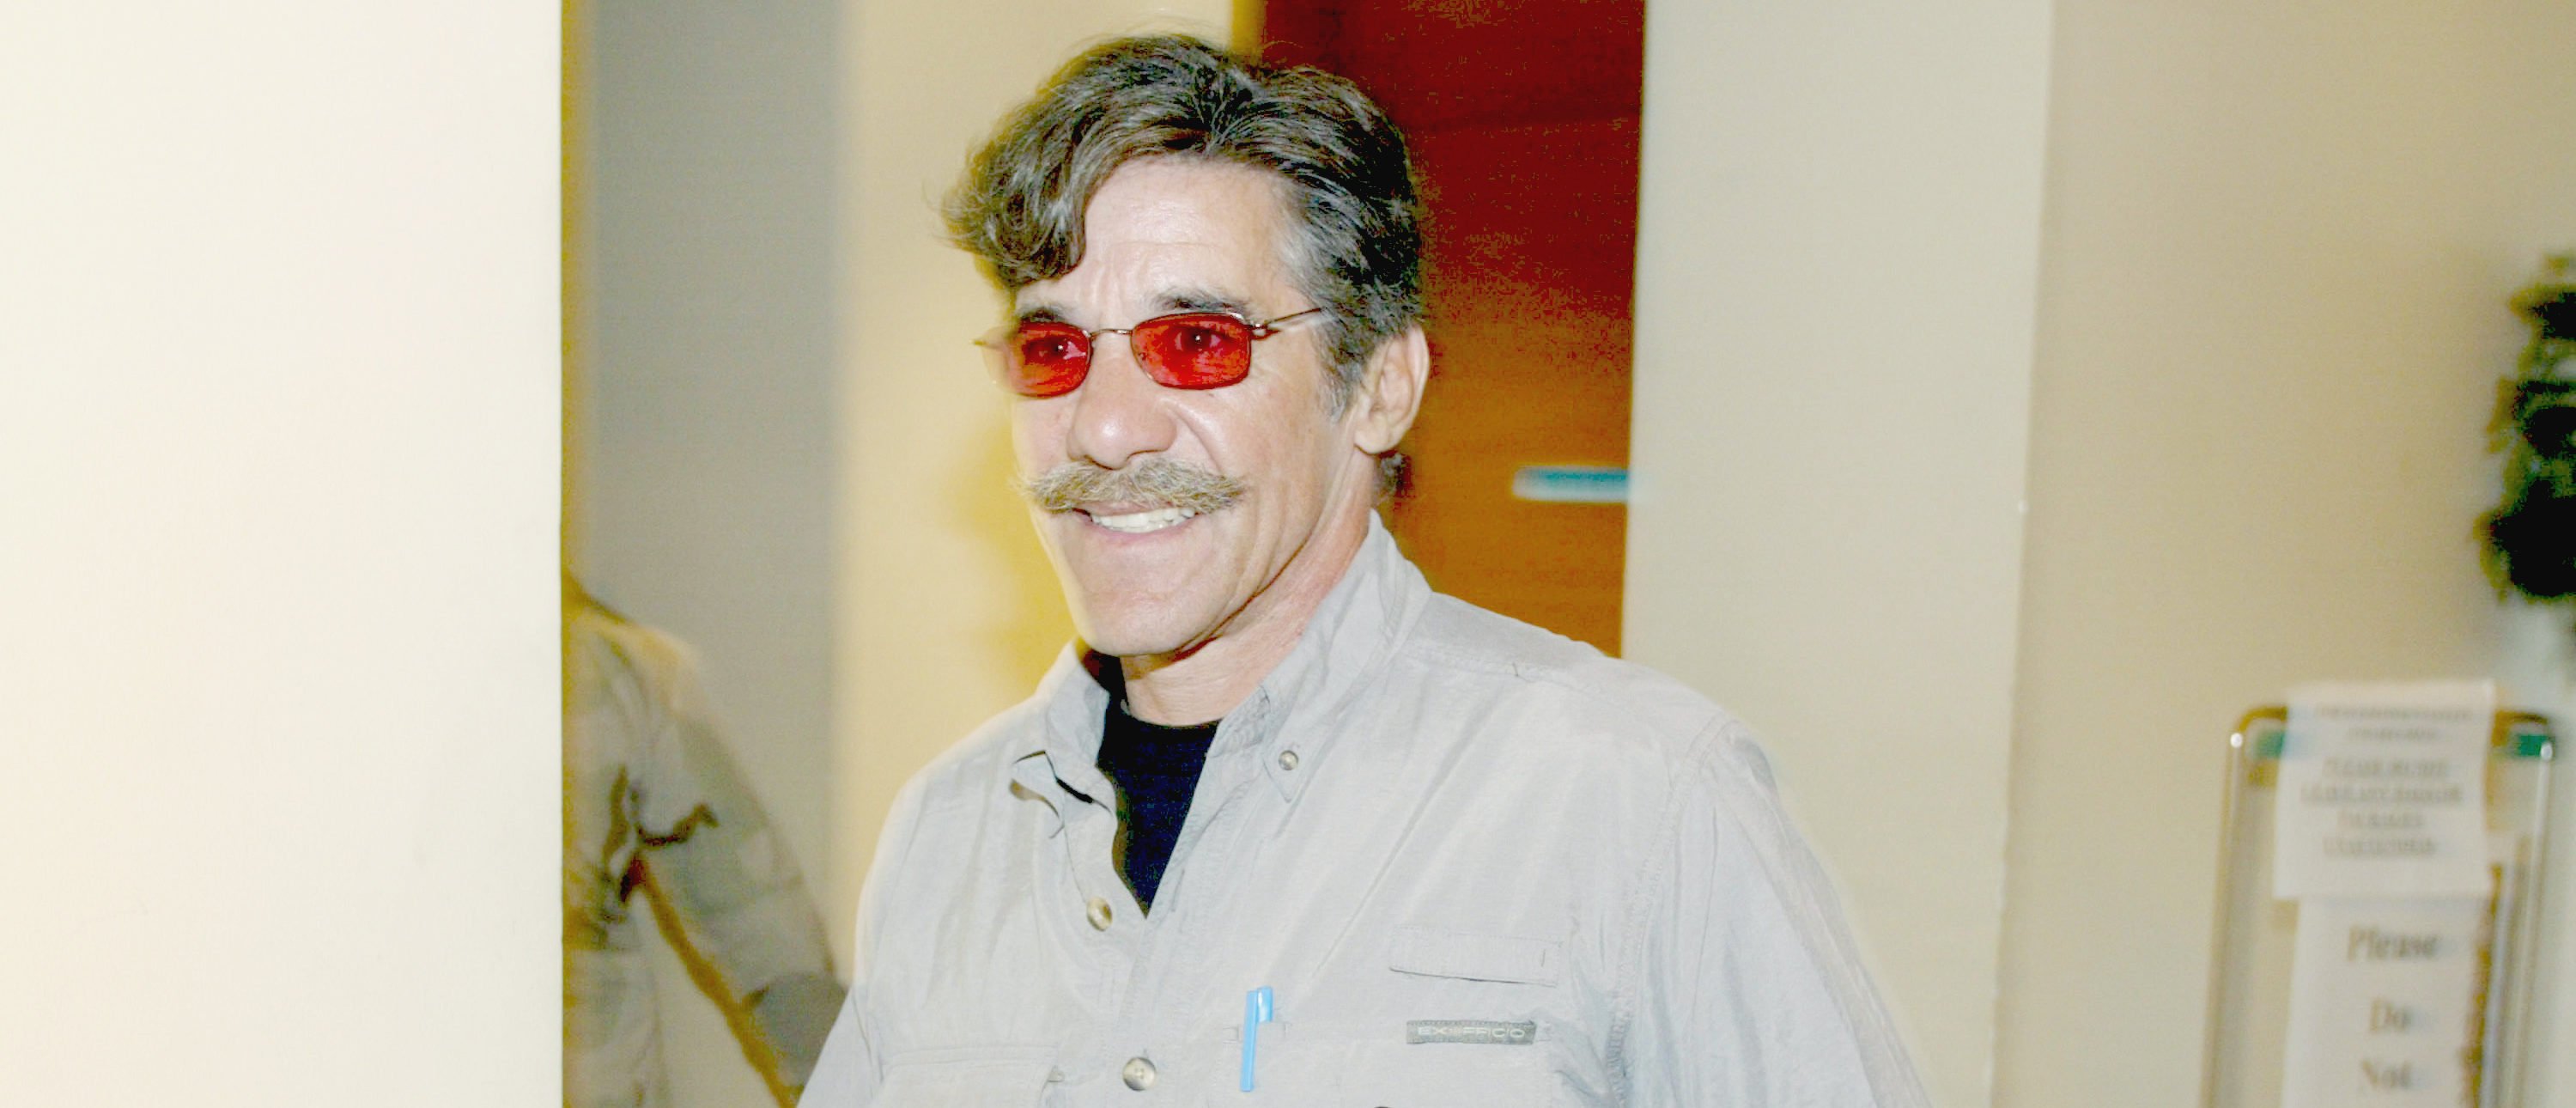 Reporting from Puerto Rico, Geraldo Rivera is challenging the media...